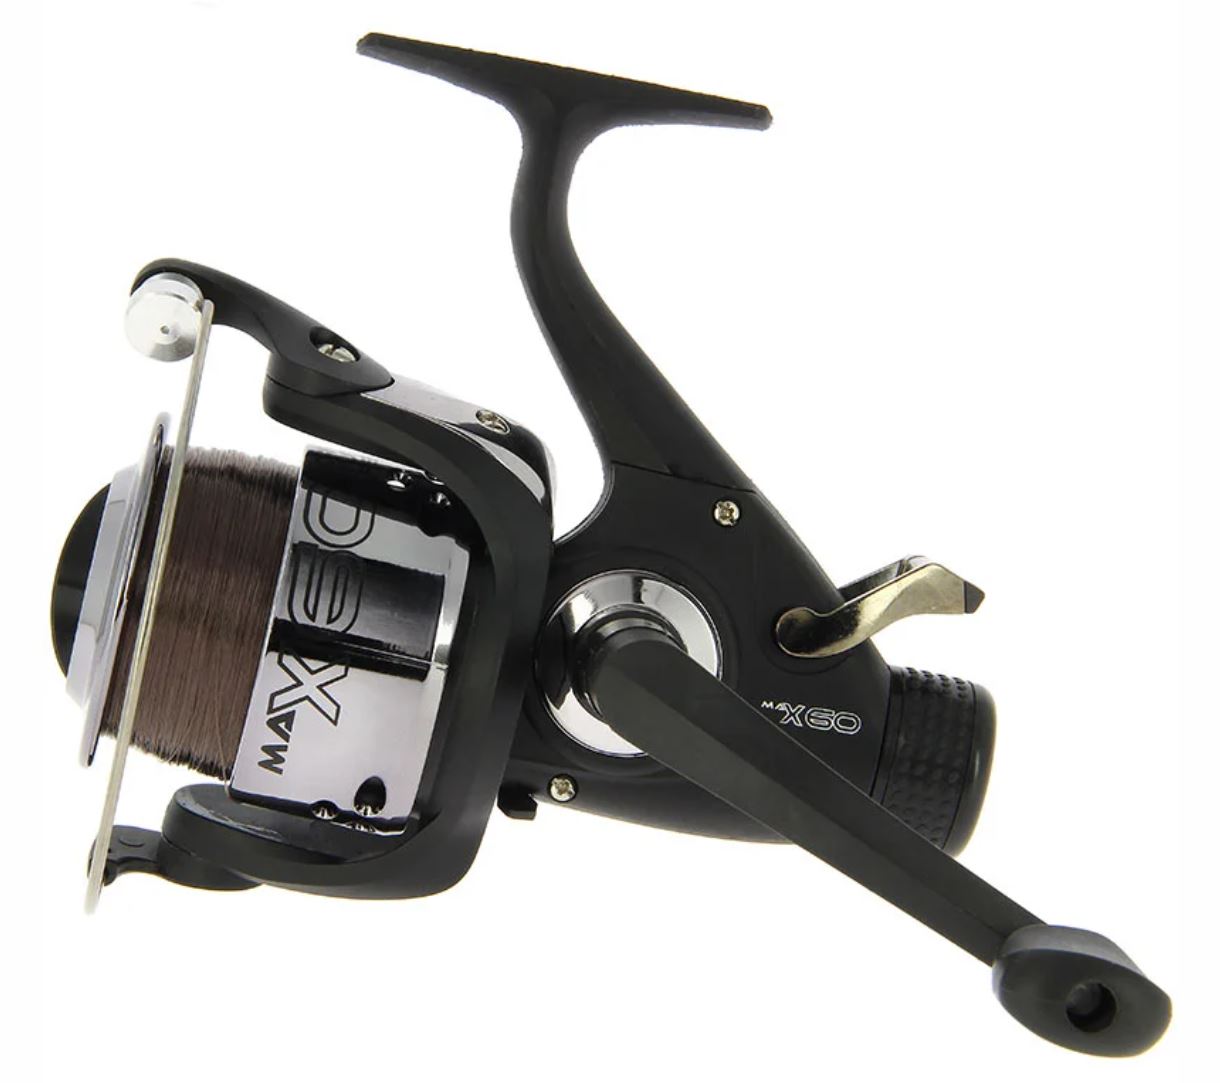 Angling Pursuits Max 60 - 2BB Carp Runner Reel loaded with 10lb Line